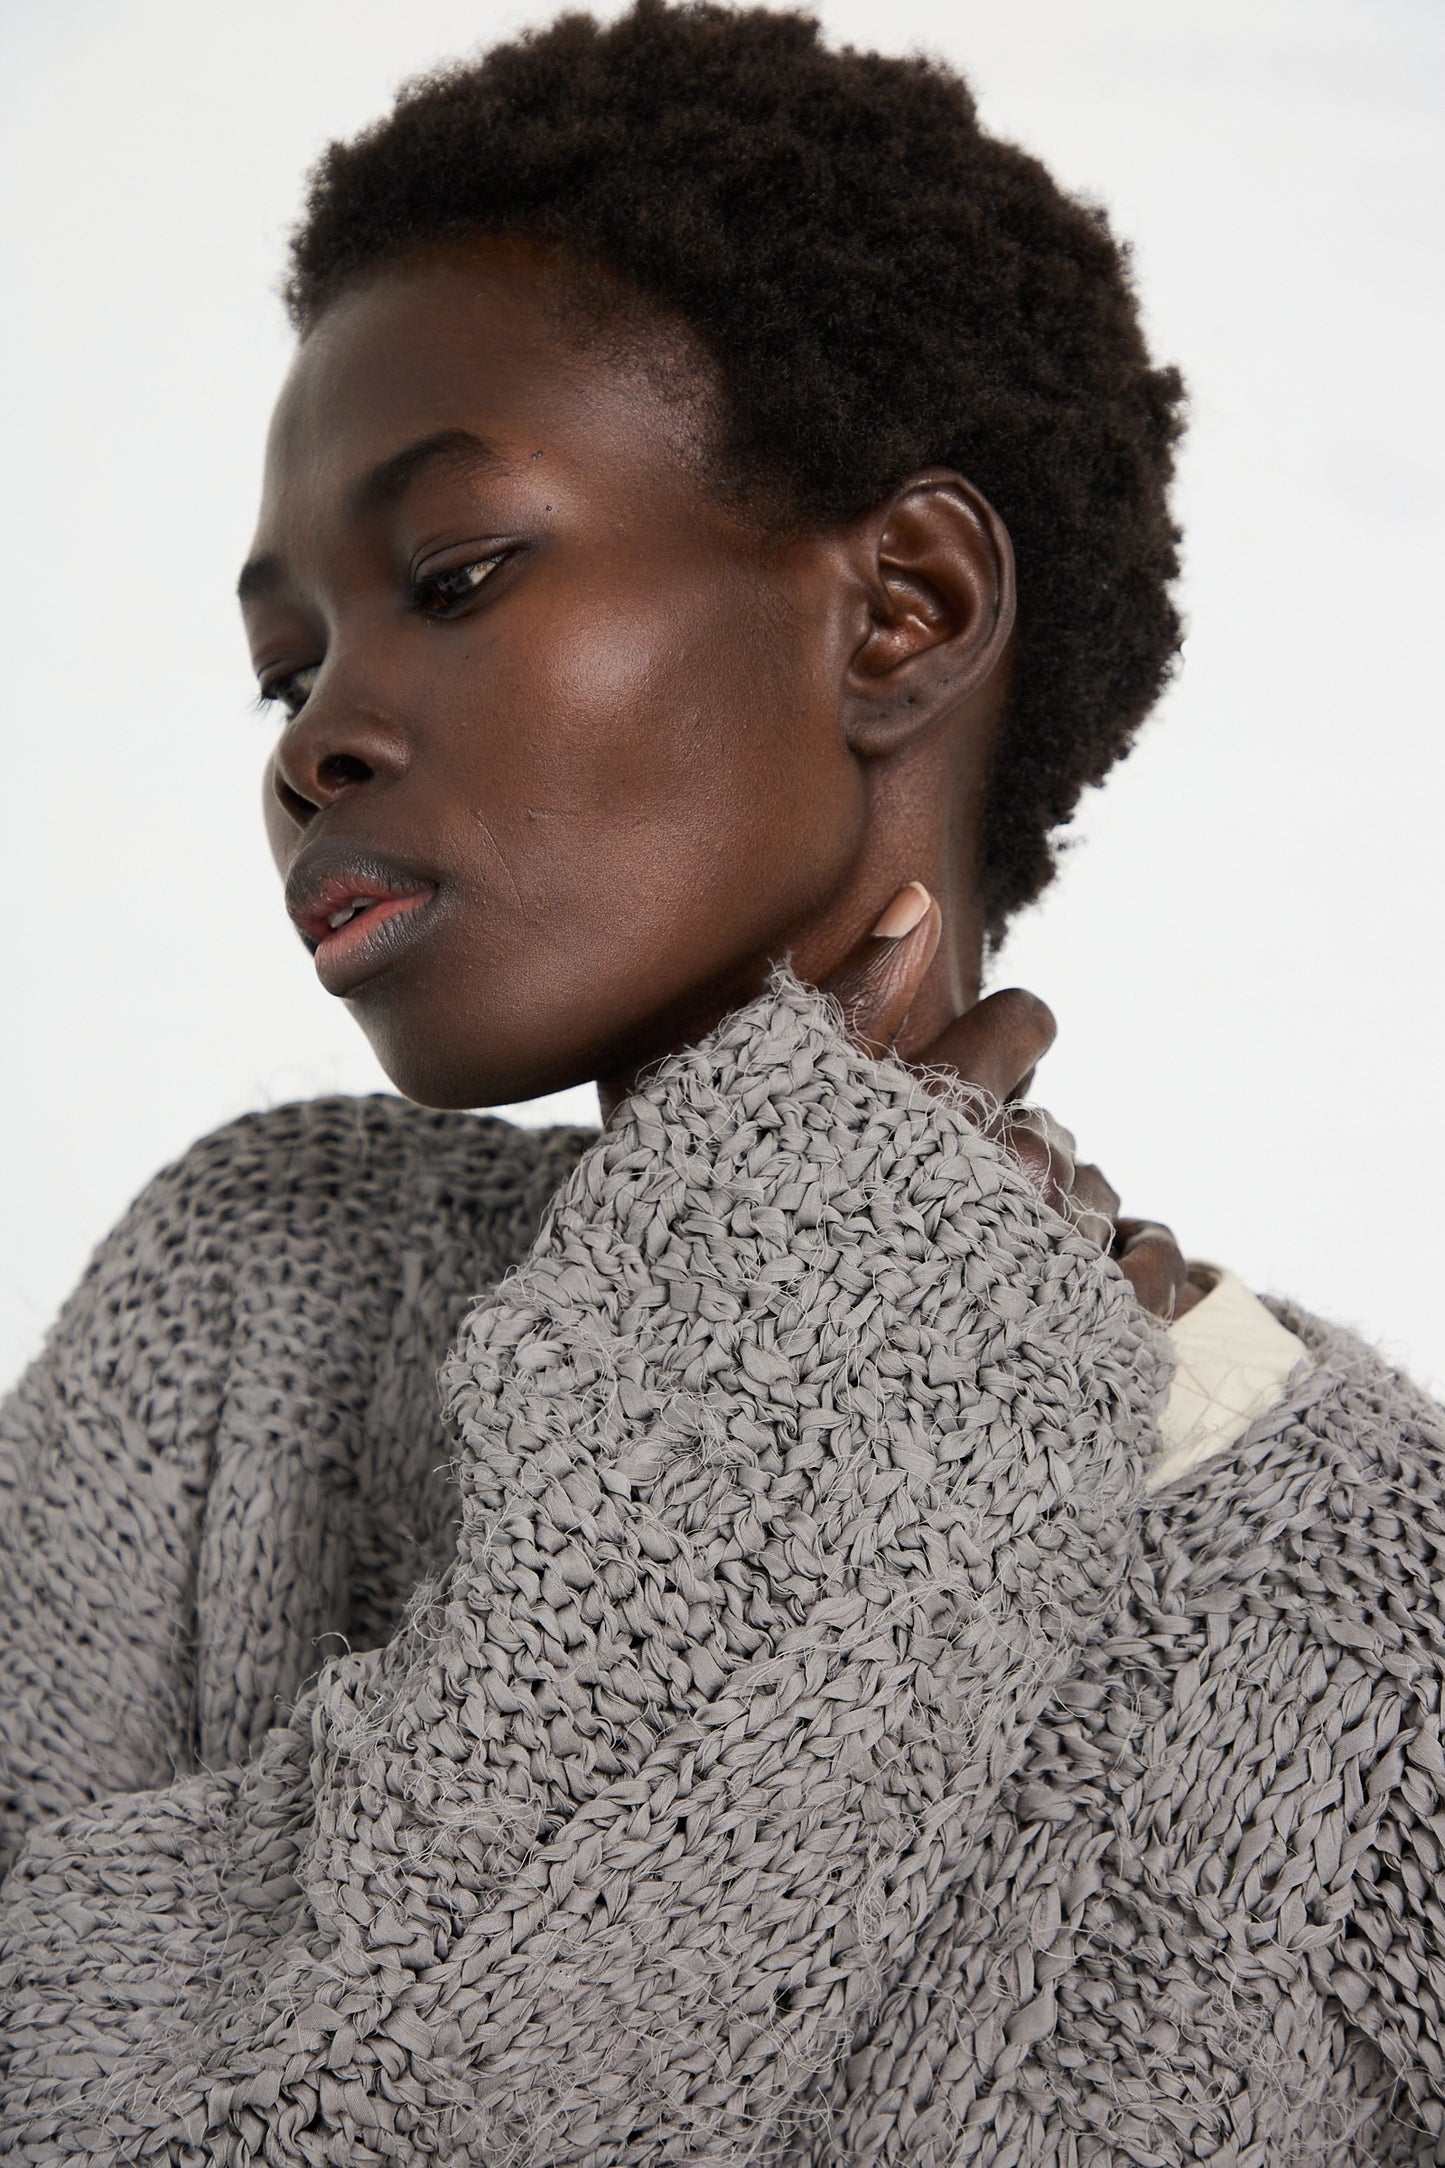 A person with short curly hair wearing a gray Handknit Pullover Sweater in Gris by Lauren Manoogian looks down while gently touching their neck with one hand.